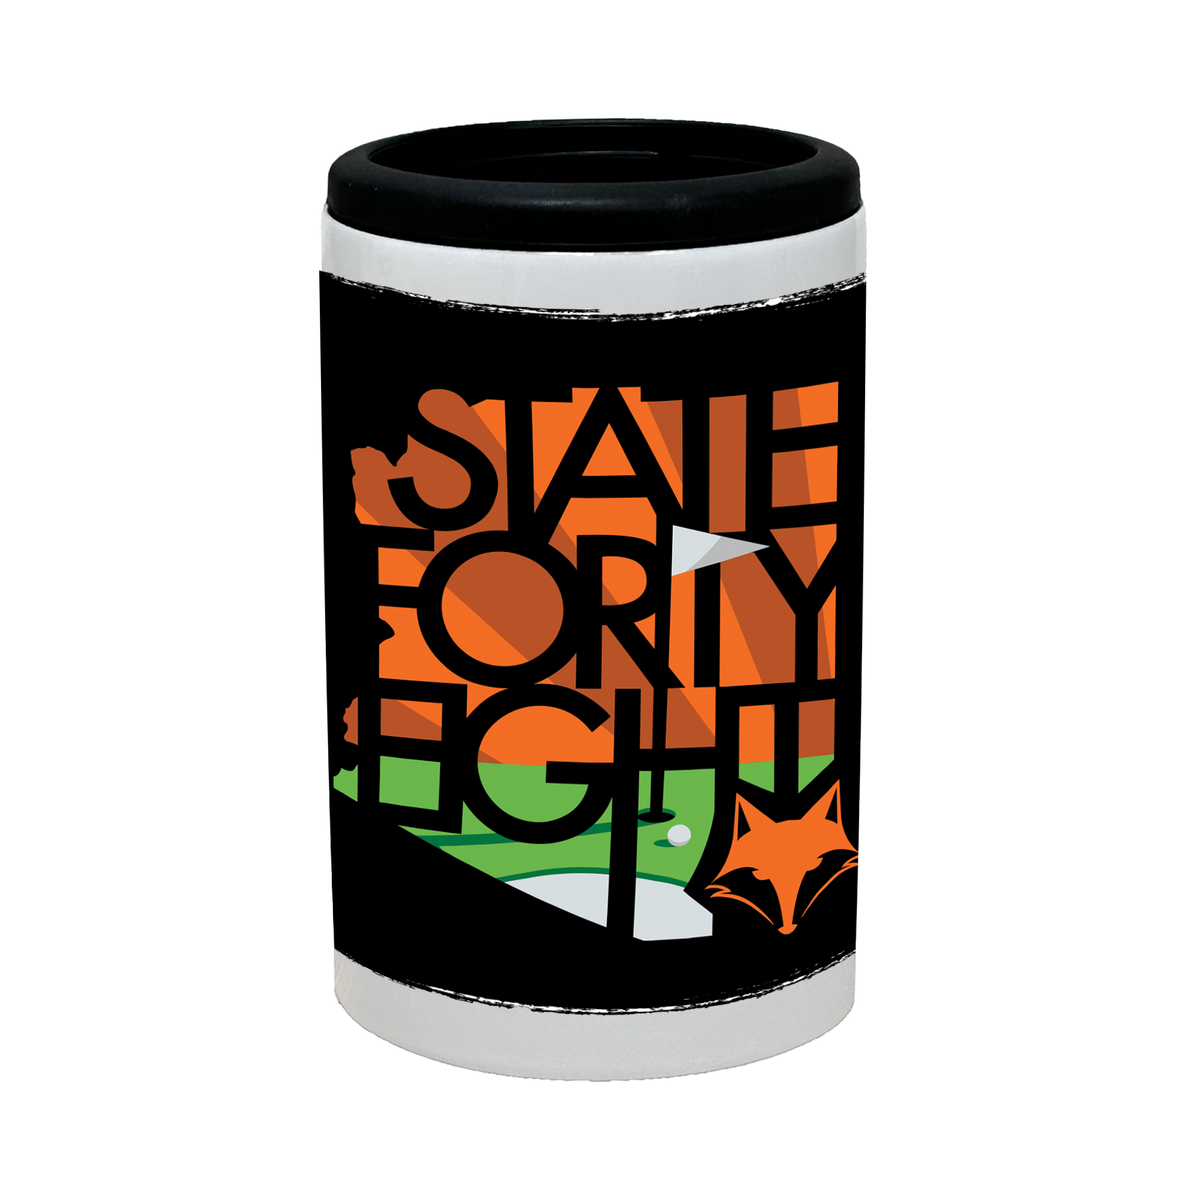 Can Cooler - State Forty-Eight Collaboration